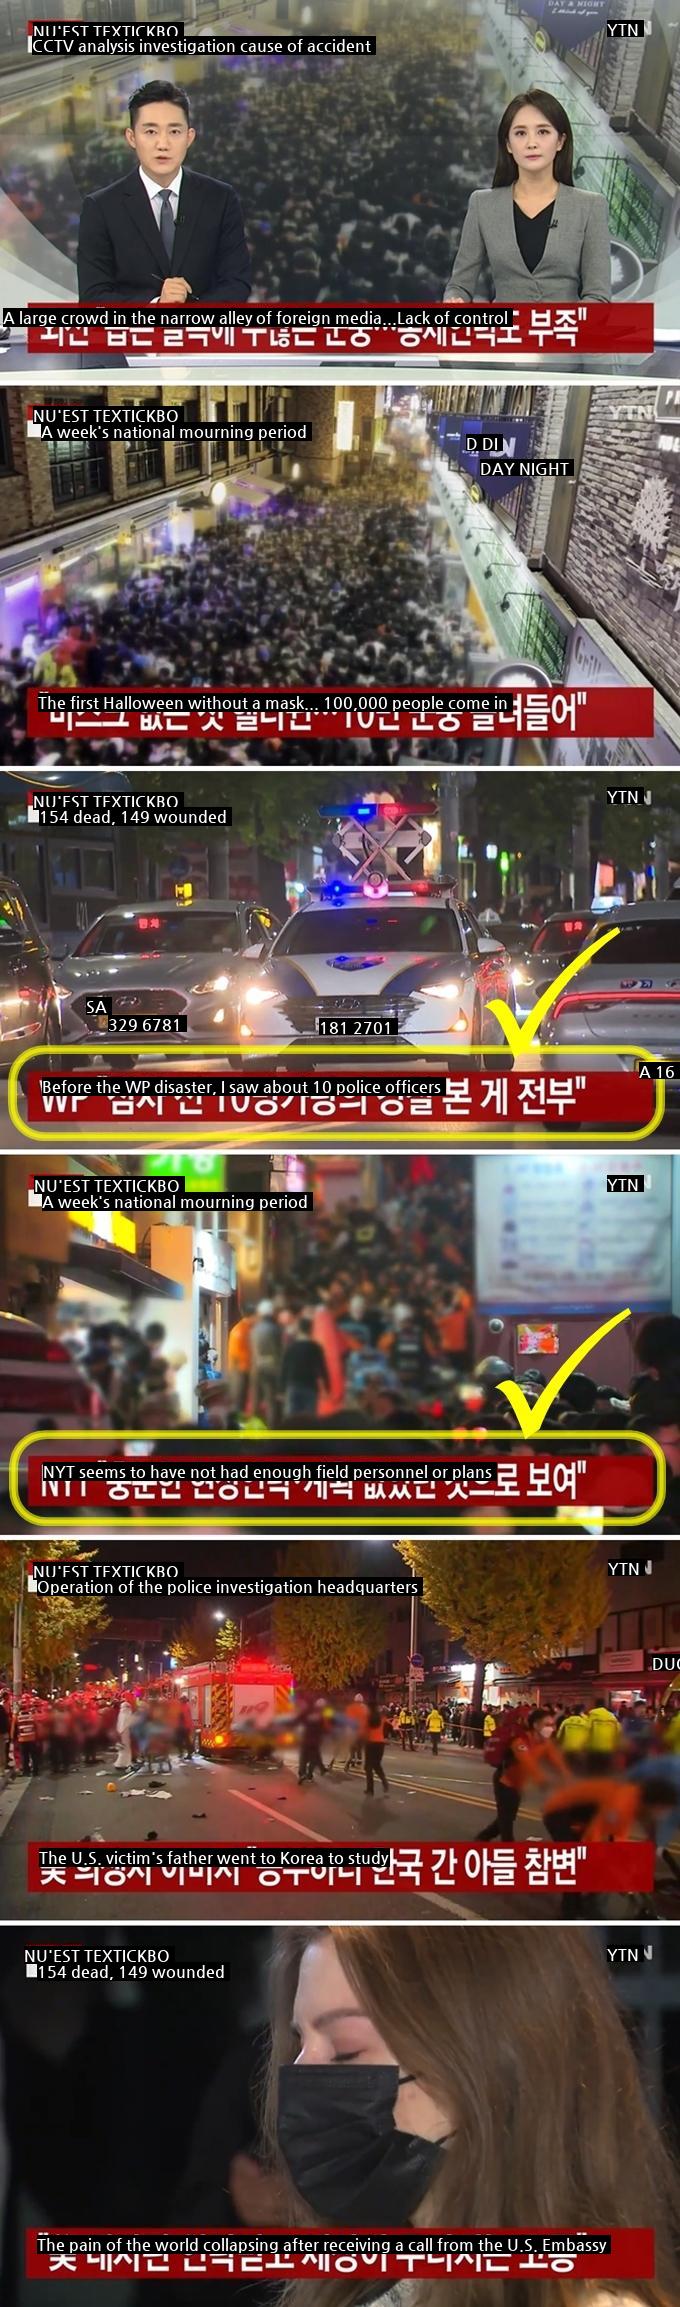 The foreign press of the Itaewon catastrophe is correct!